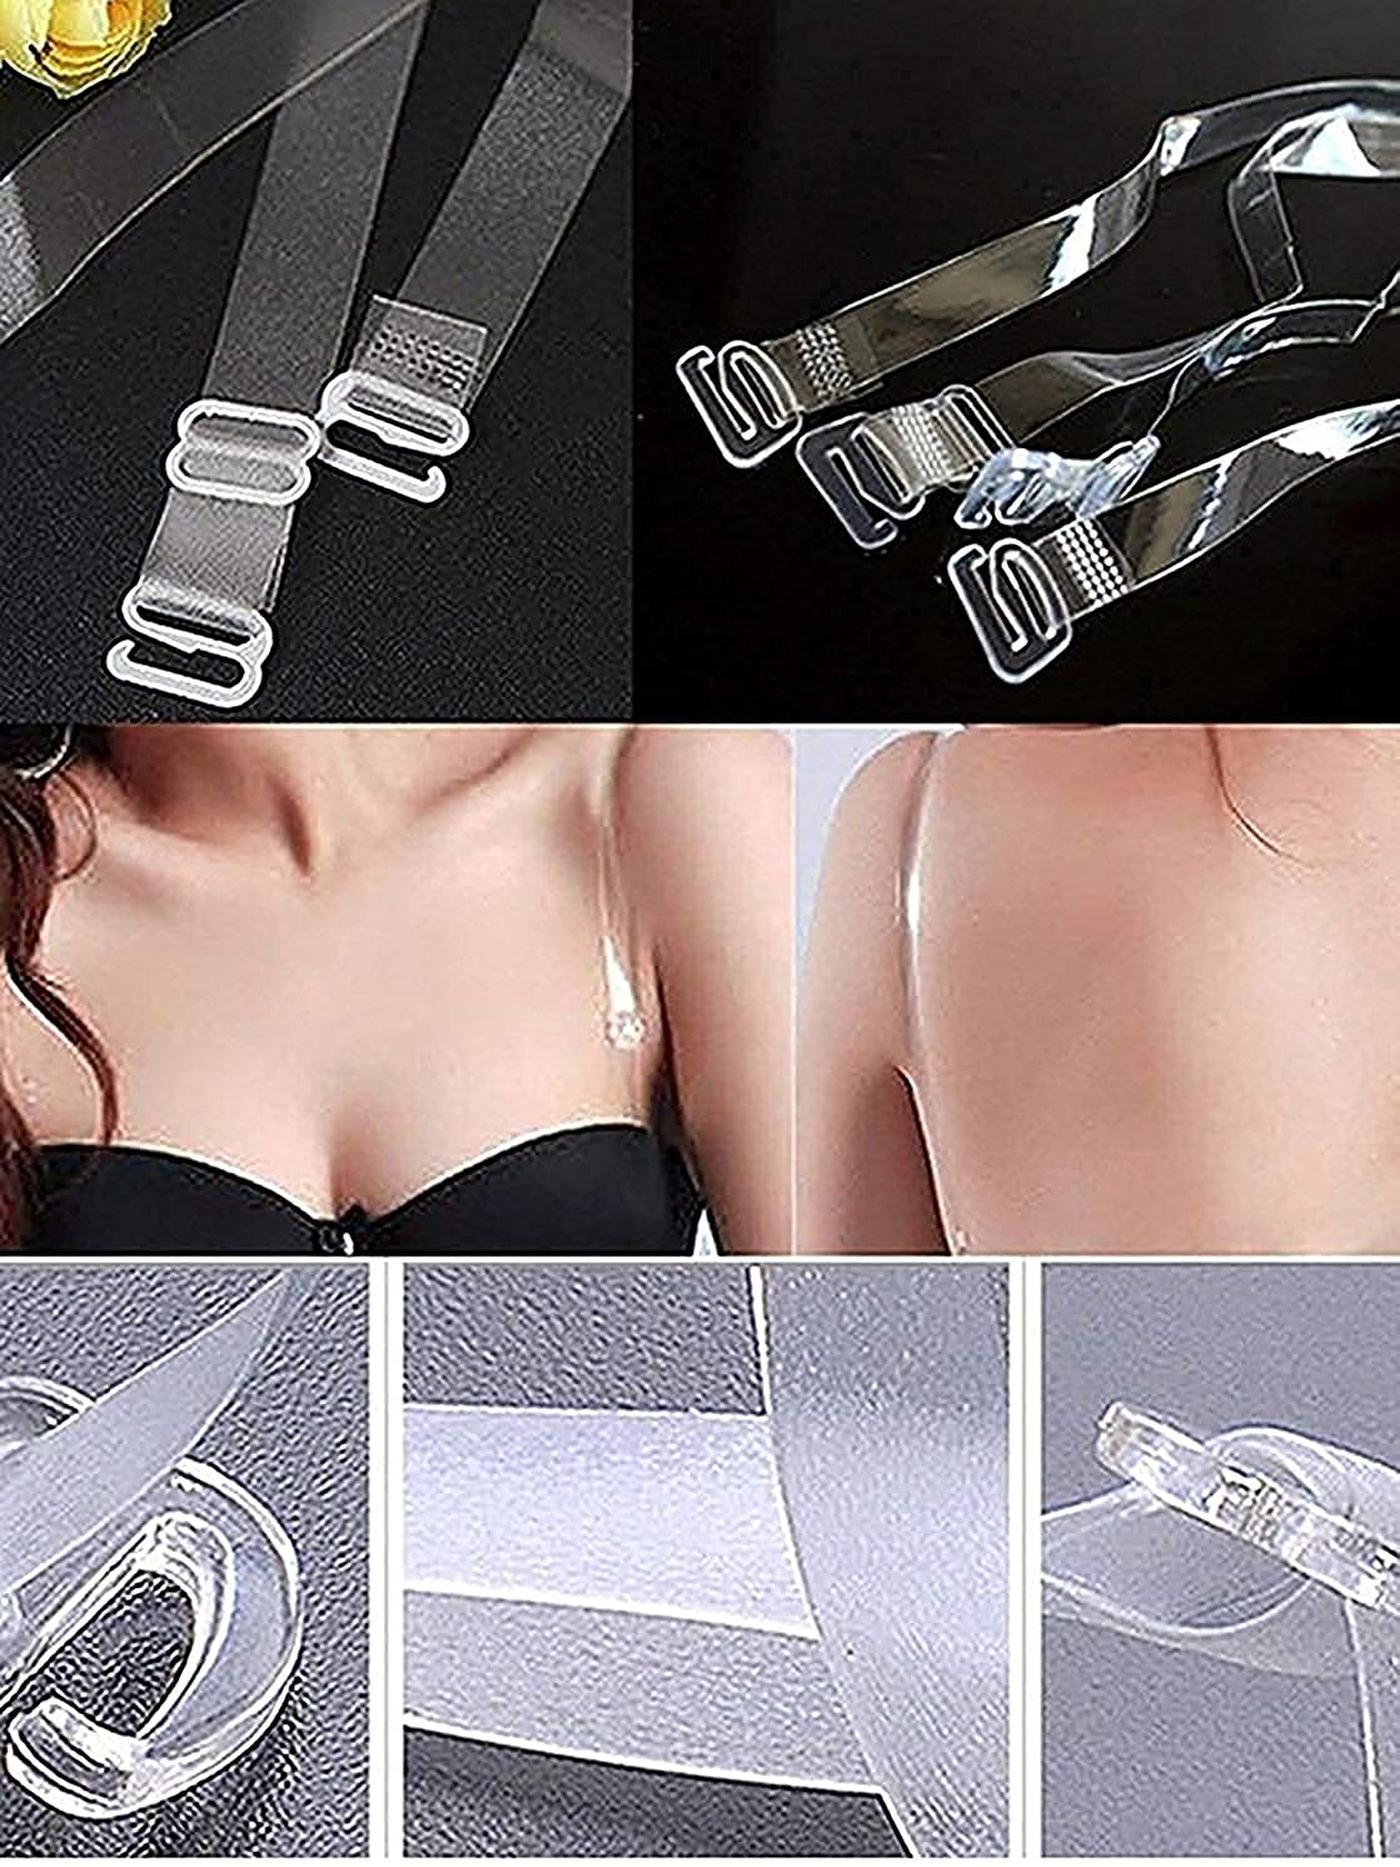 The Natural Clear Bra Straps